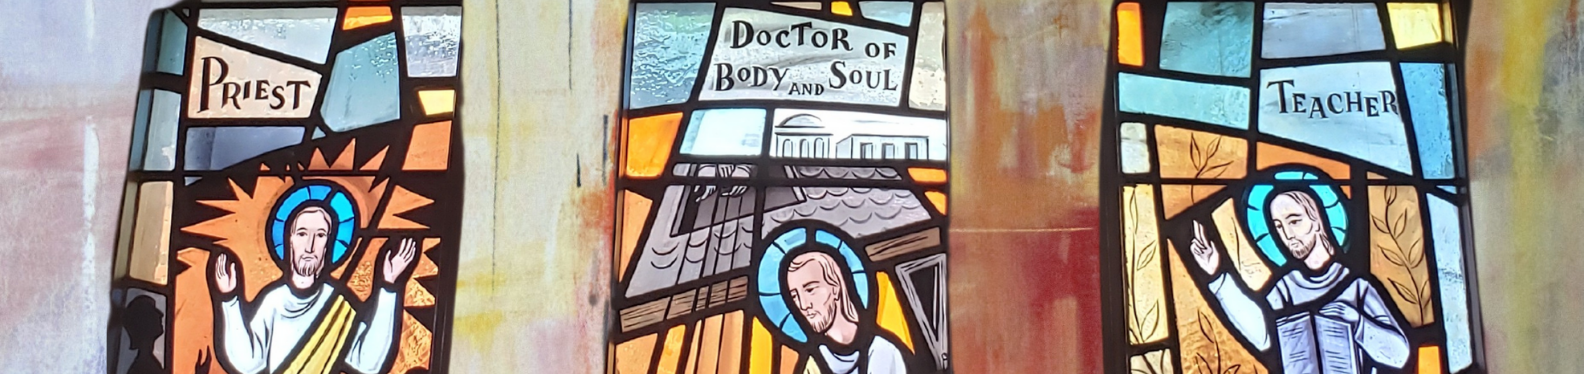 Stained Glass of Jesus as Priest, Healer of Body and Soul and Teacher